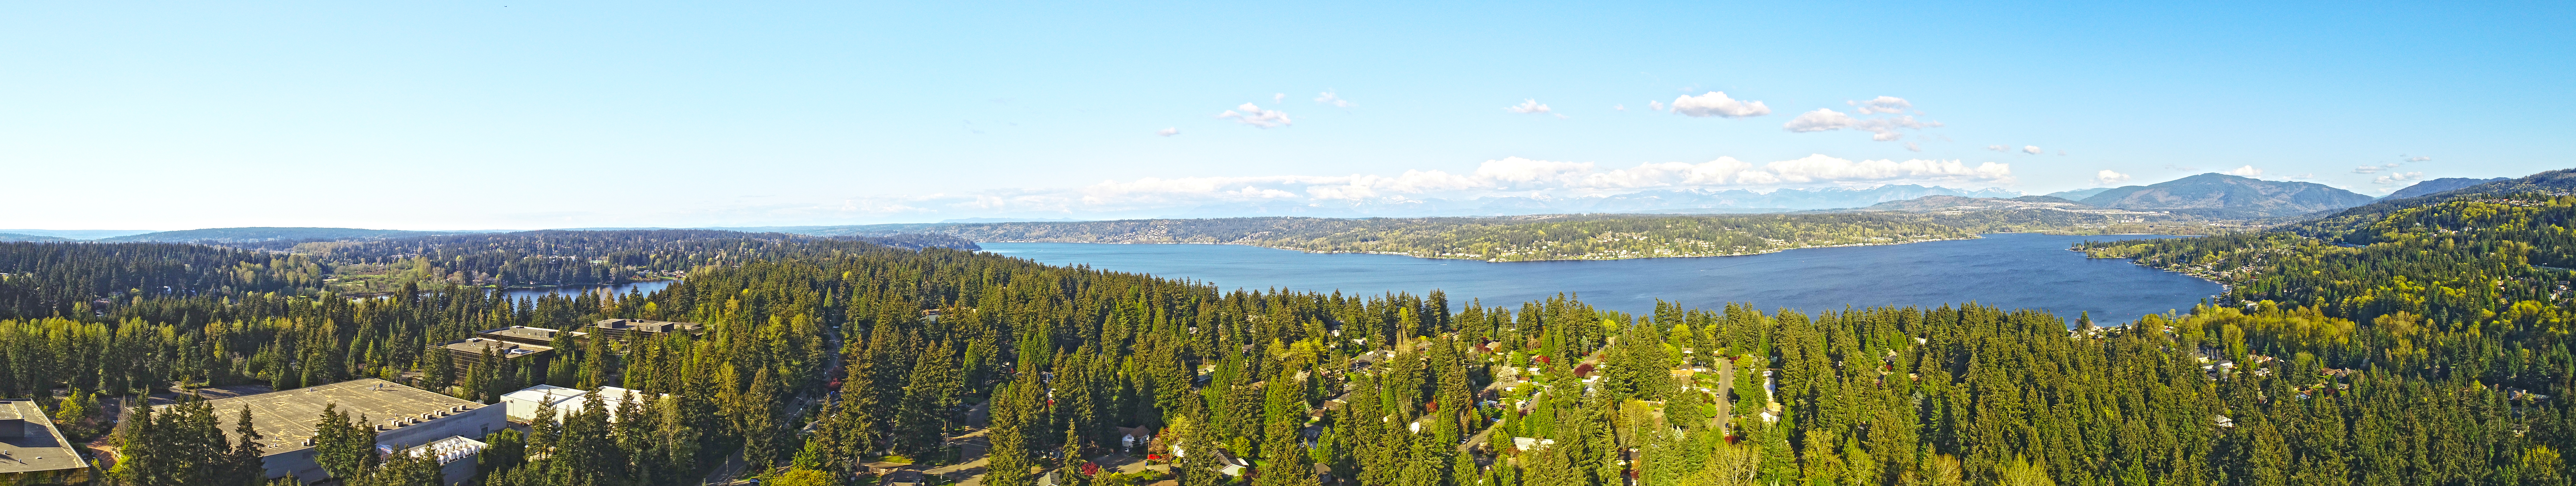 Featured image for the project, Reviewing and Updating Preferred Tree List for the City of Issaquah, WA